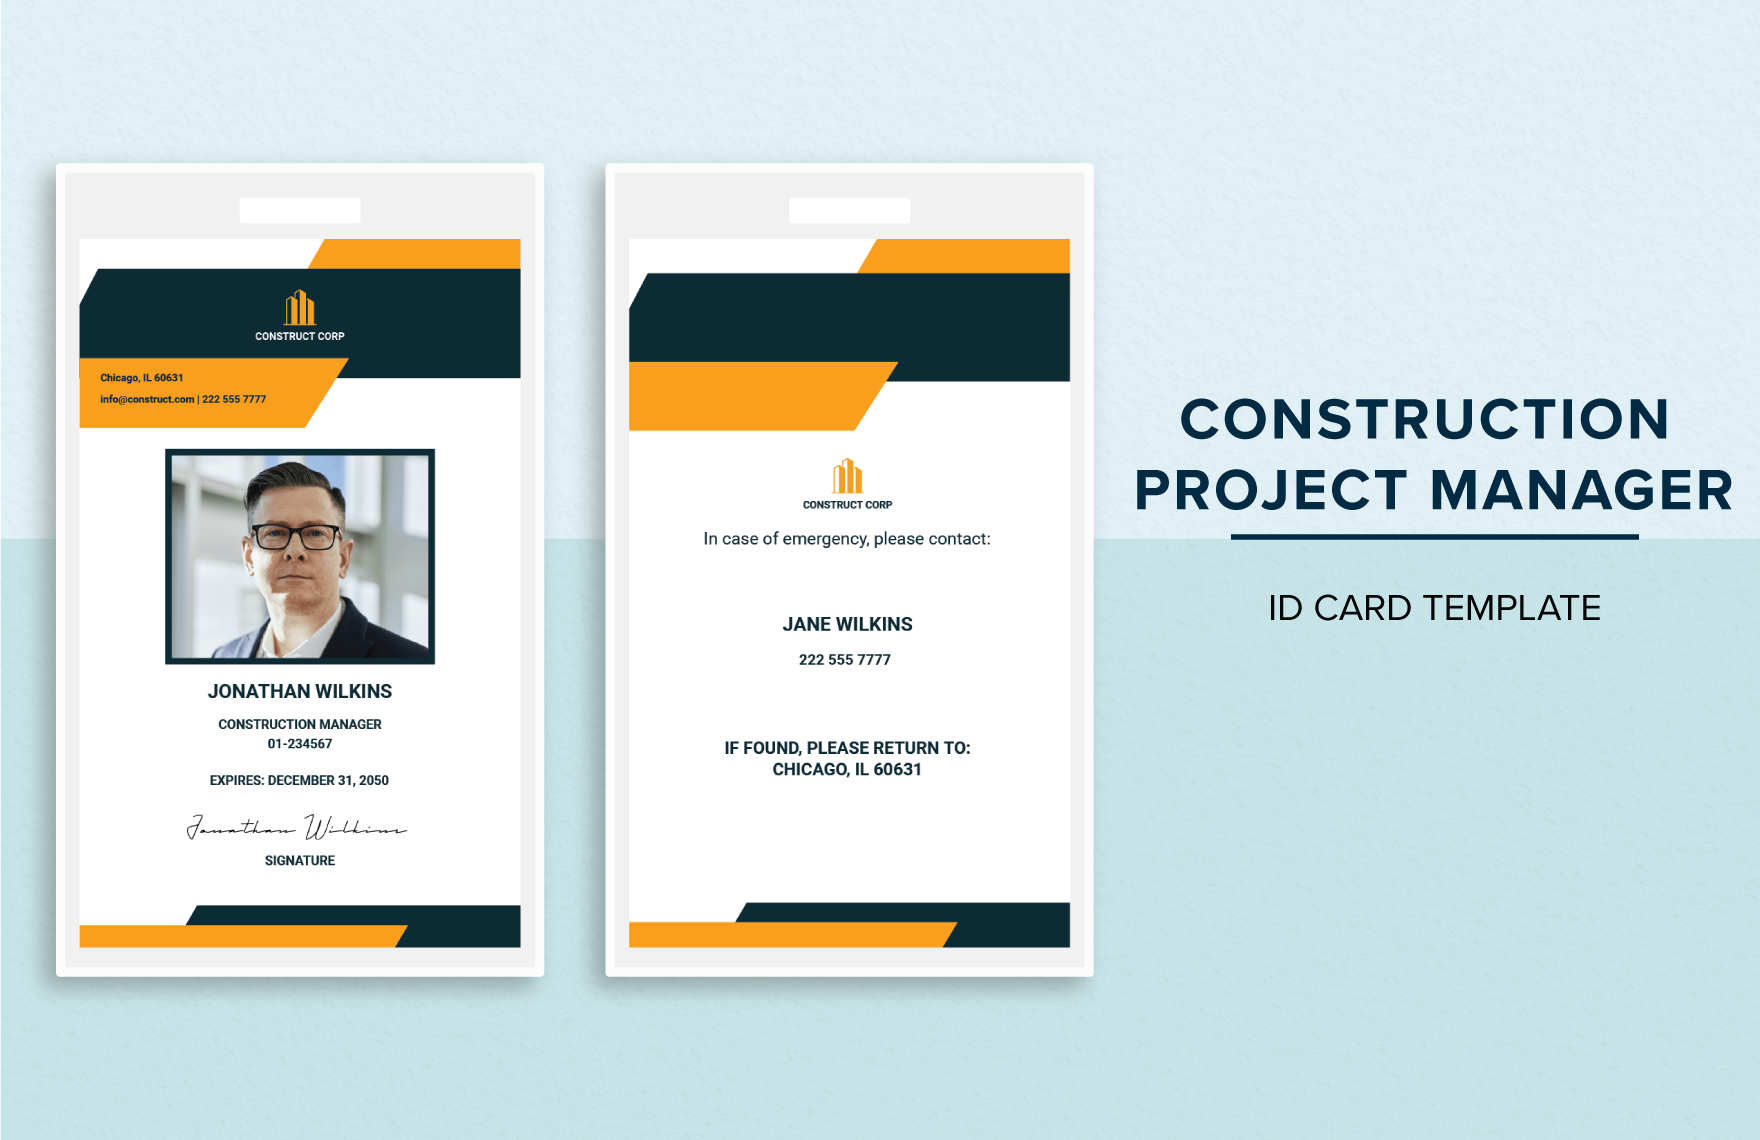 Construction Project Manager ID Card Template